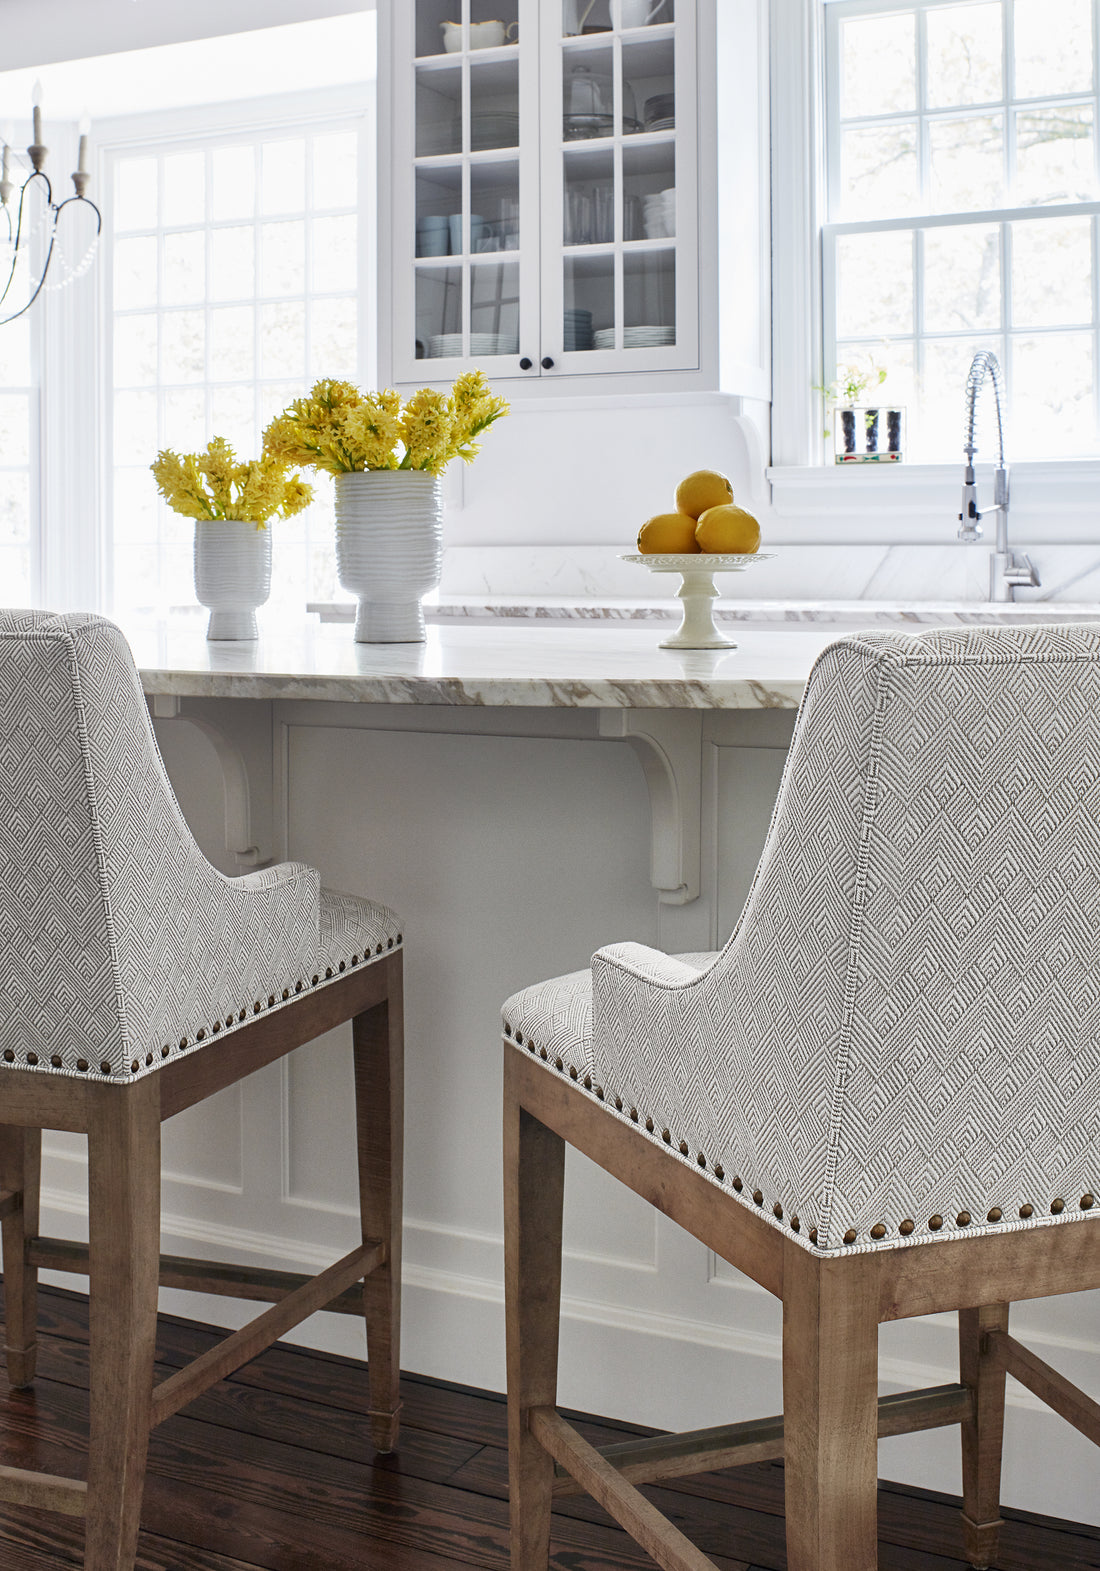 Hudson Dining Chair in Maddox woven fabric in jute color - pattern number W73333 by Thibaut in the Nomad collection